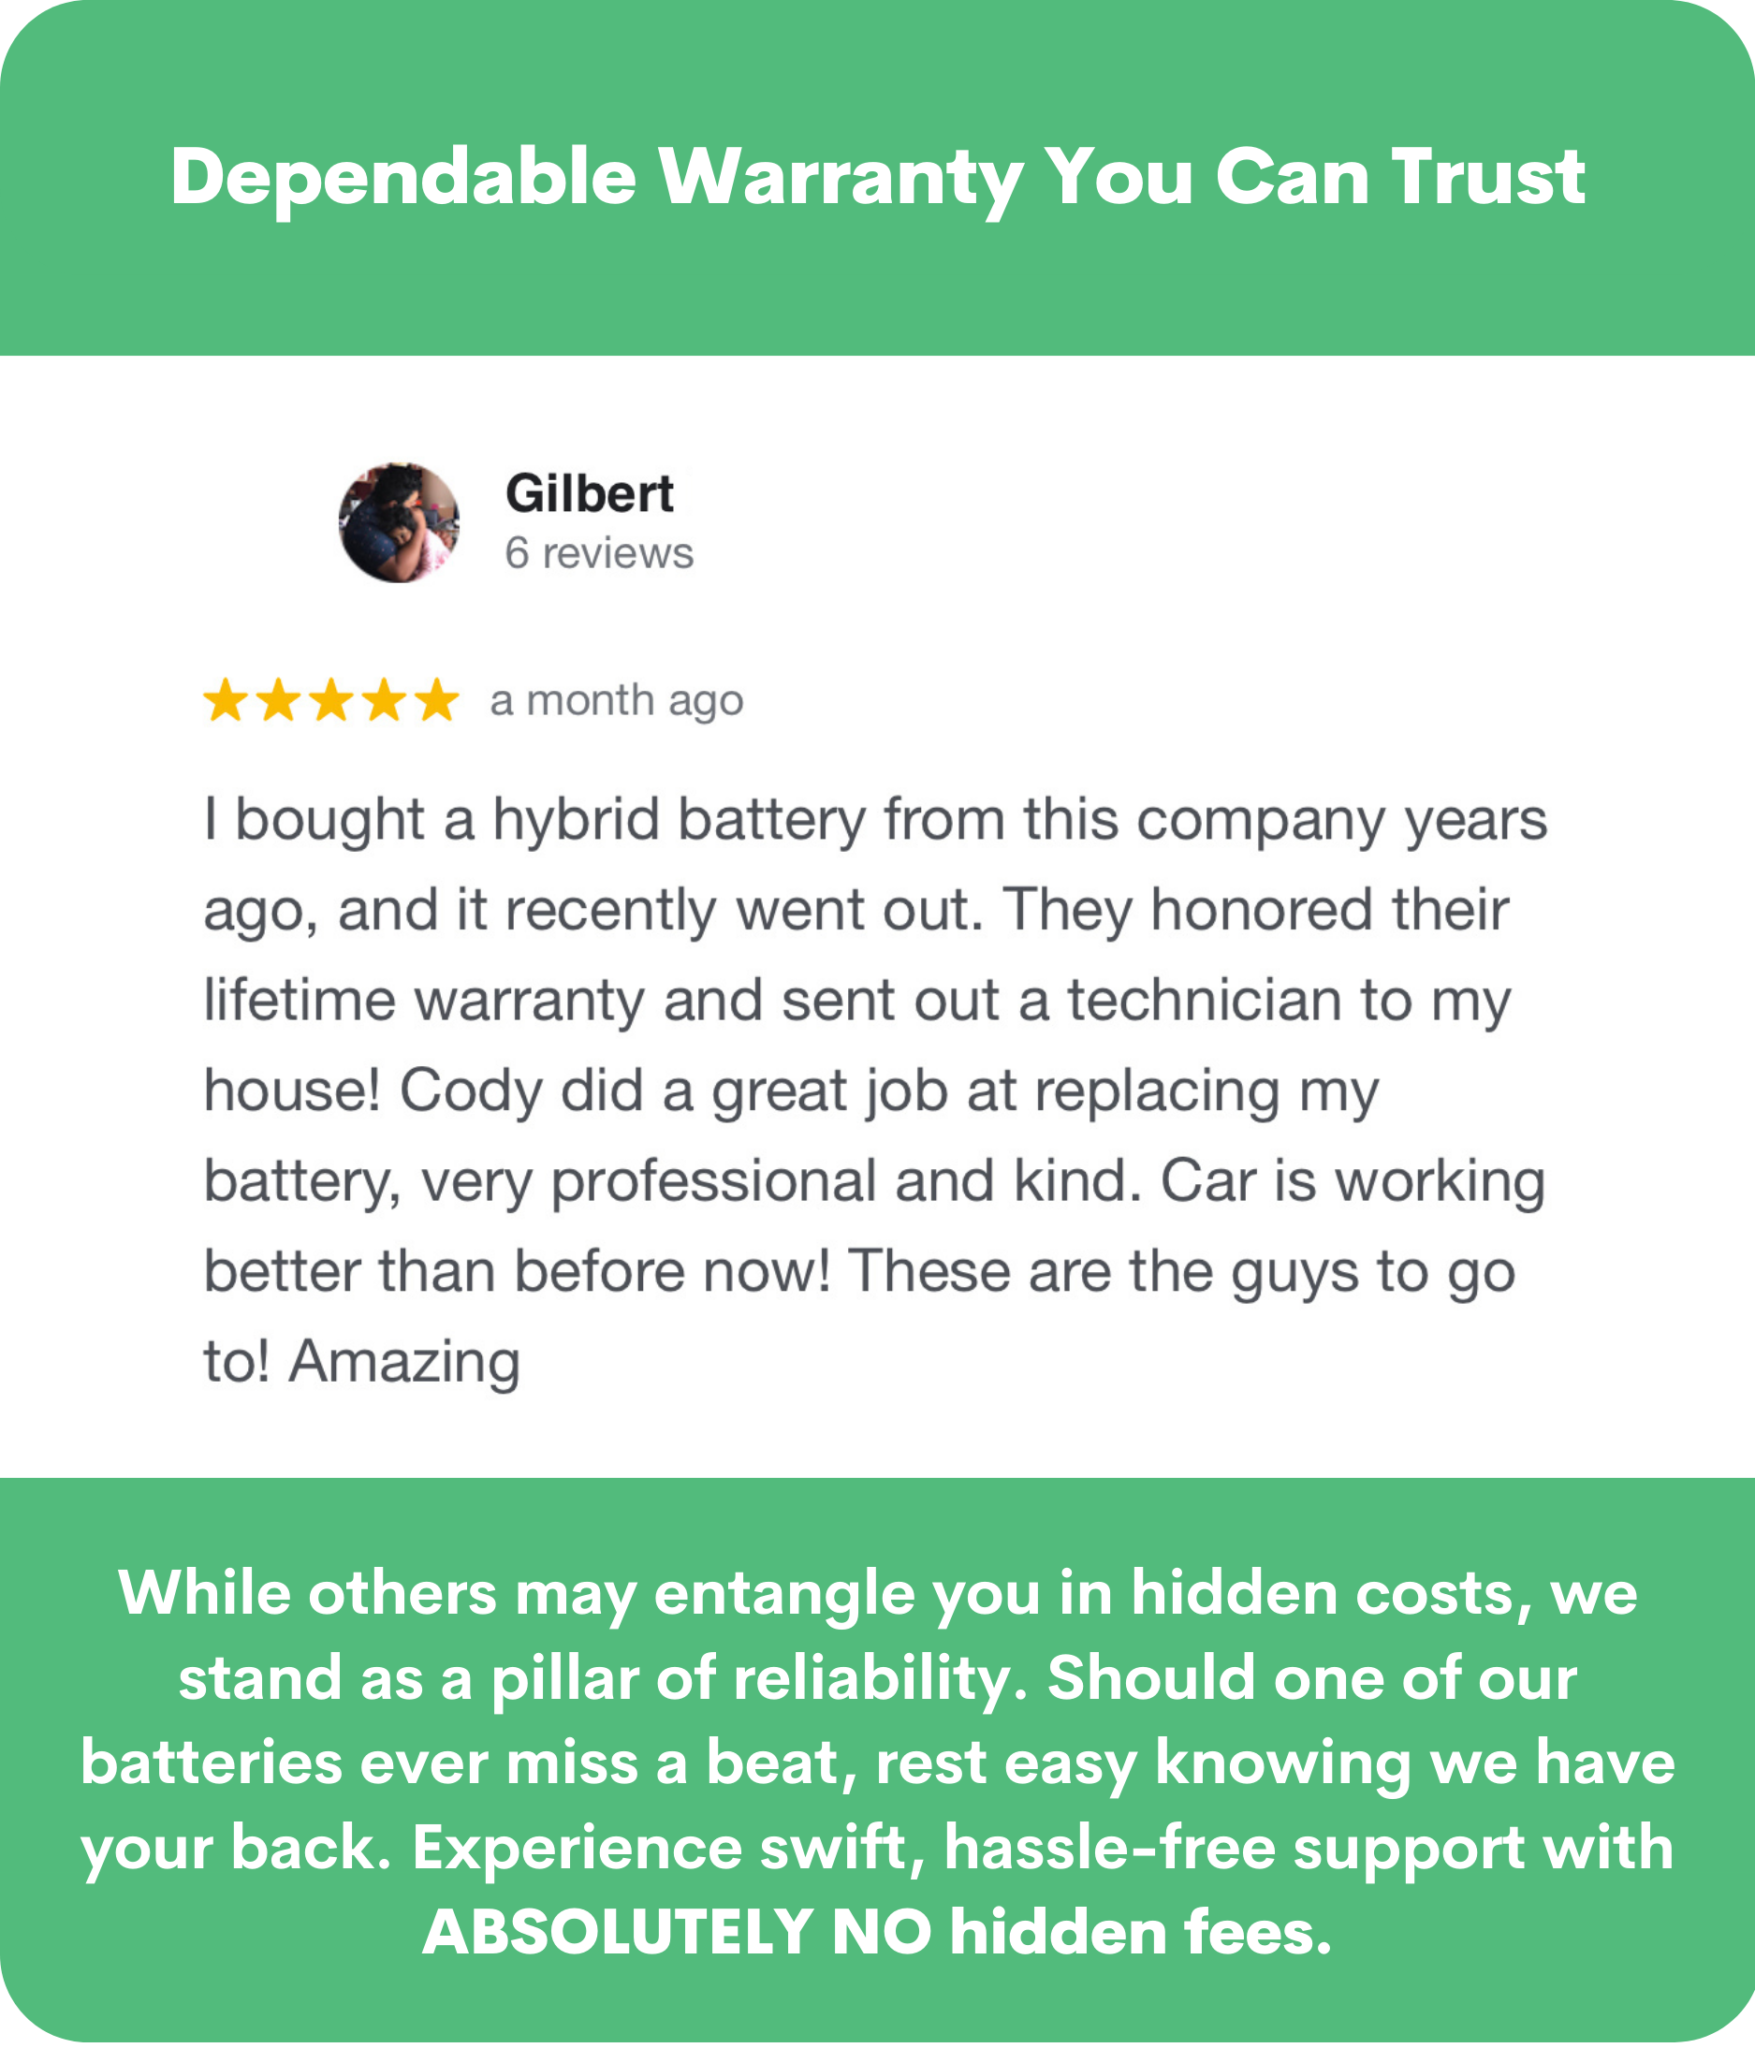 Dependable Warranty You Can Trust (16)